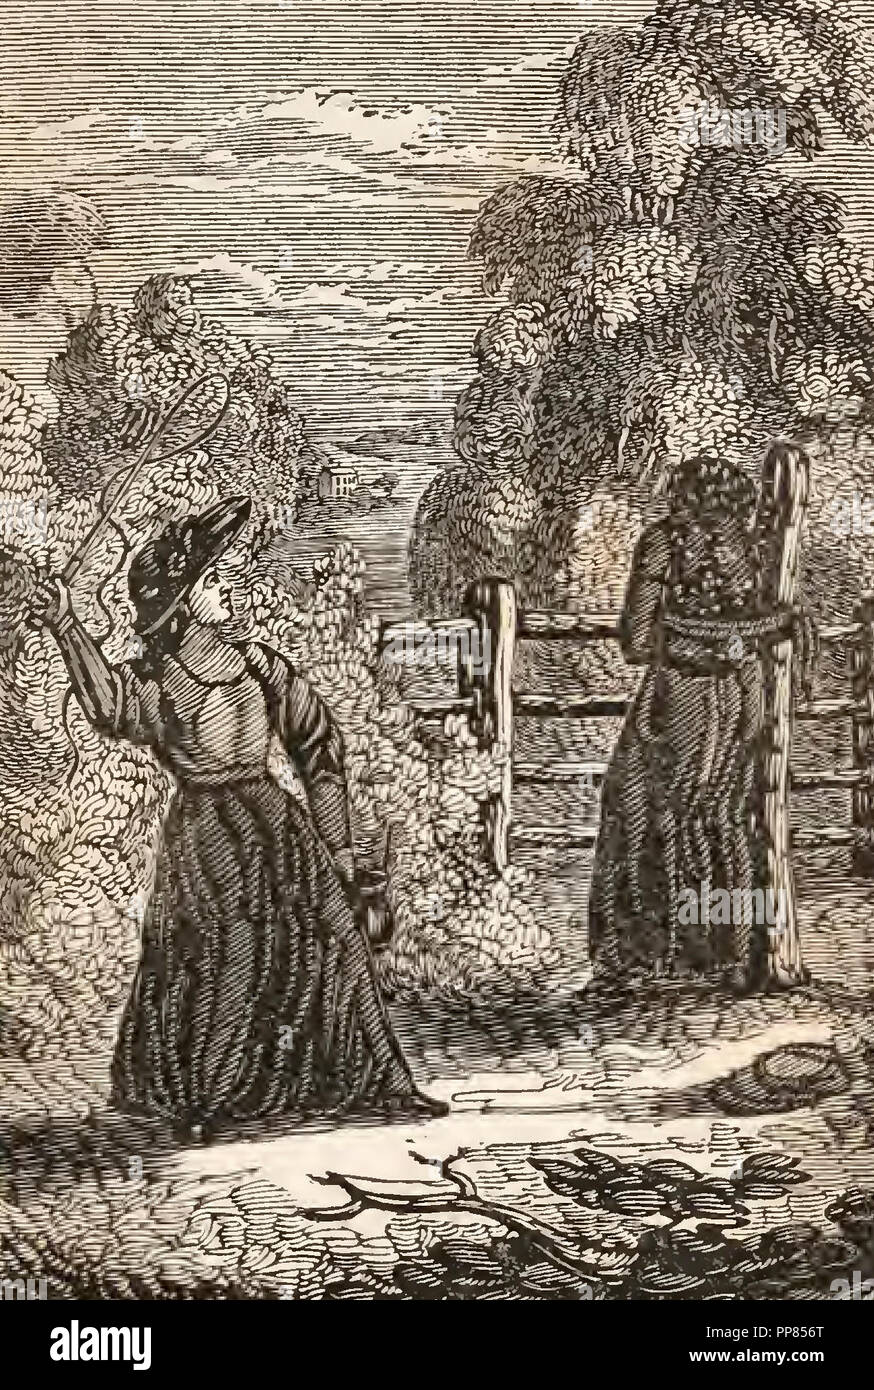 Ladies whipping female slave in the Antebellum American South